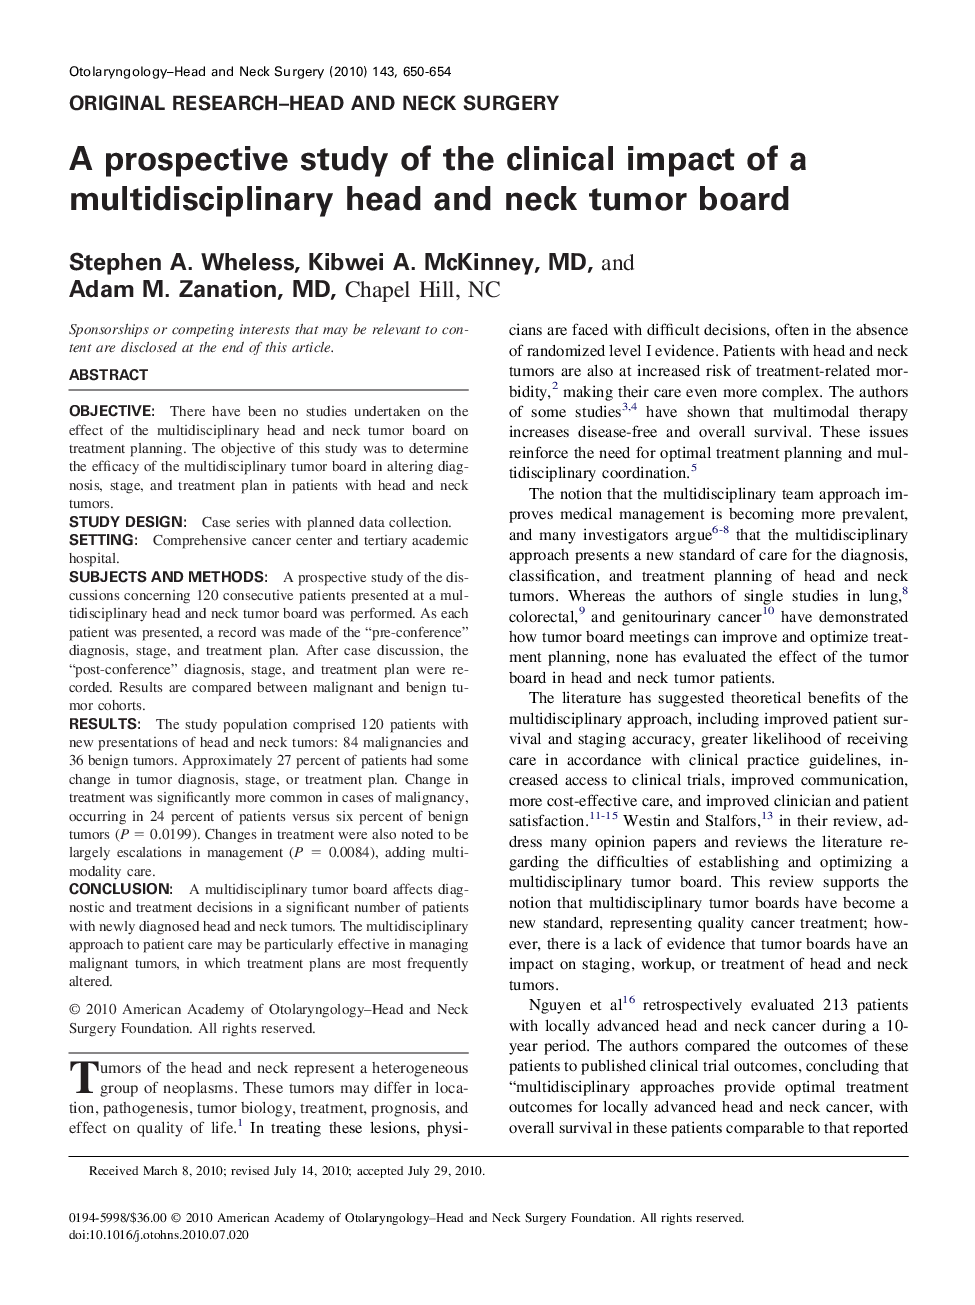 A prospective study of the clinical impact of a multidisciplinary head and neck tumor board